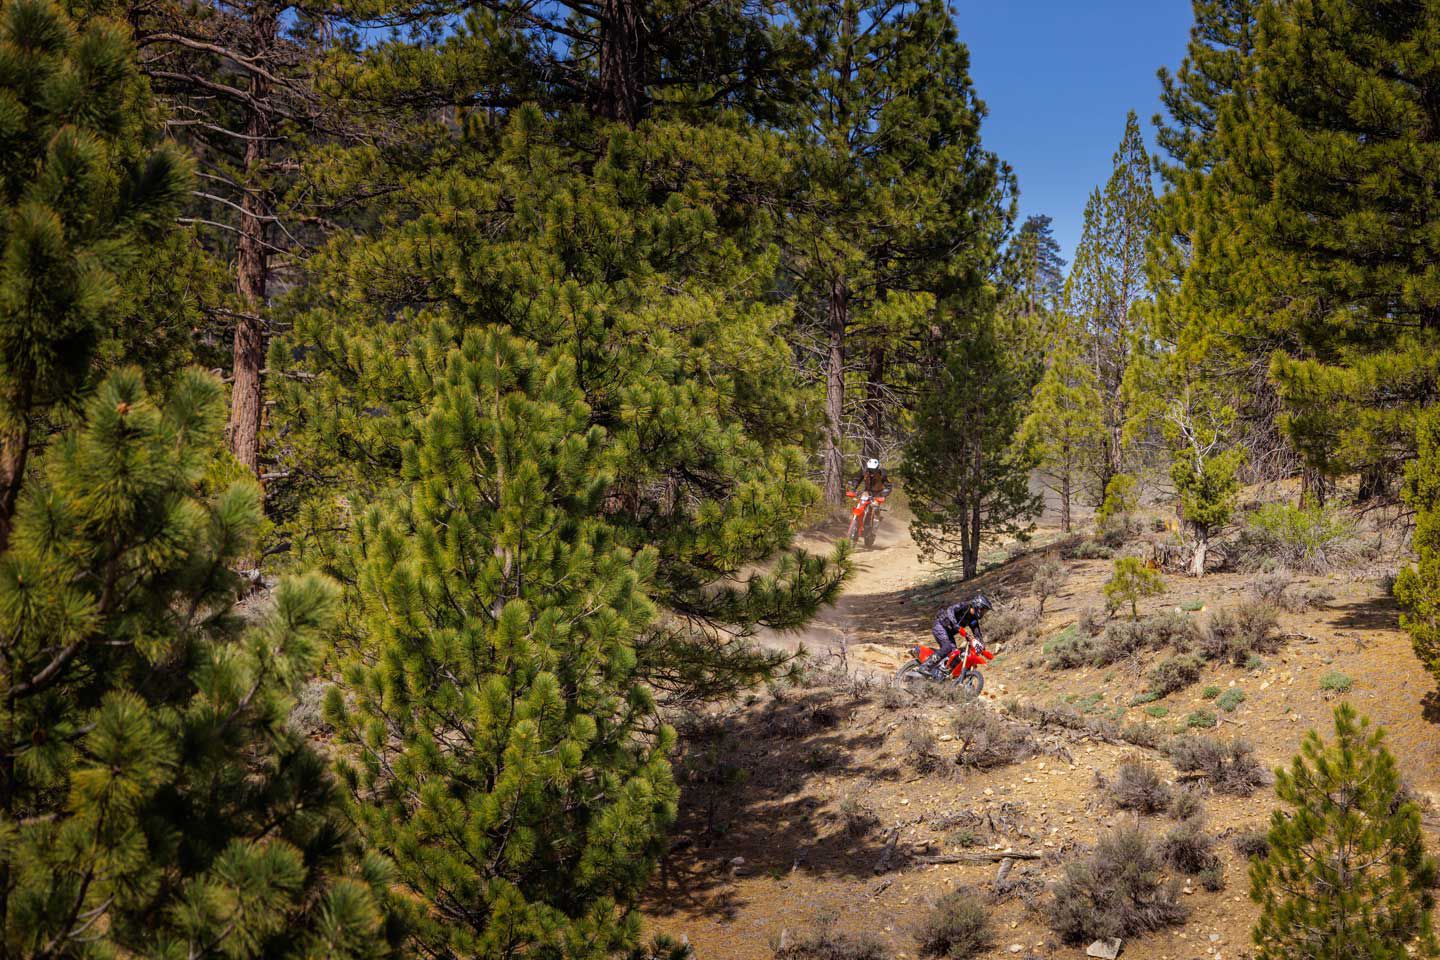 Riders participate in dual sport and adventure-touring rides high in the mountains near Big Bear Lake.